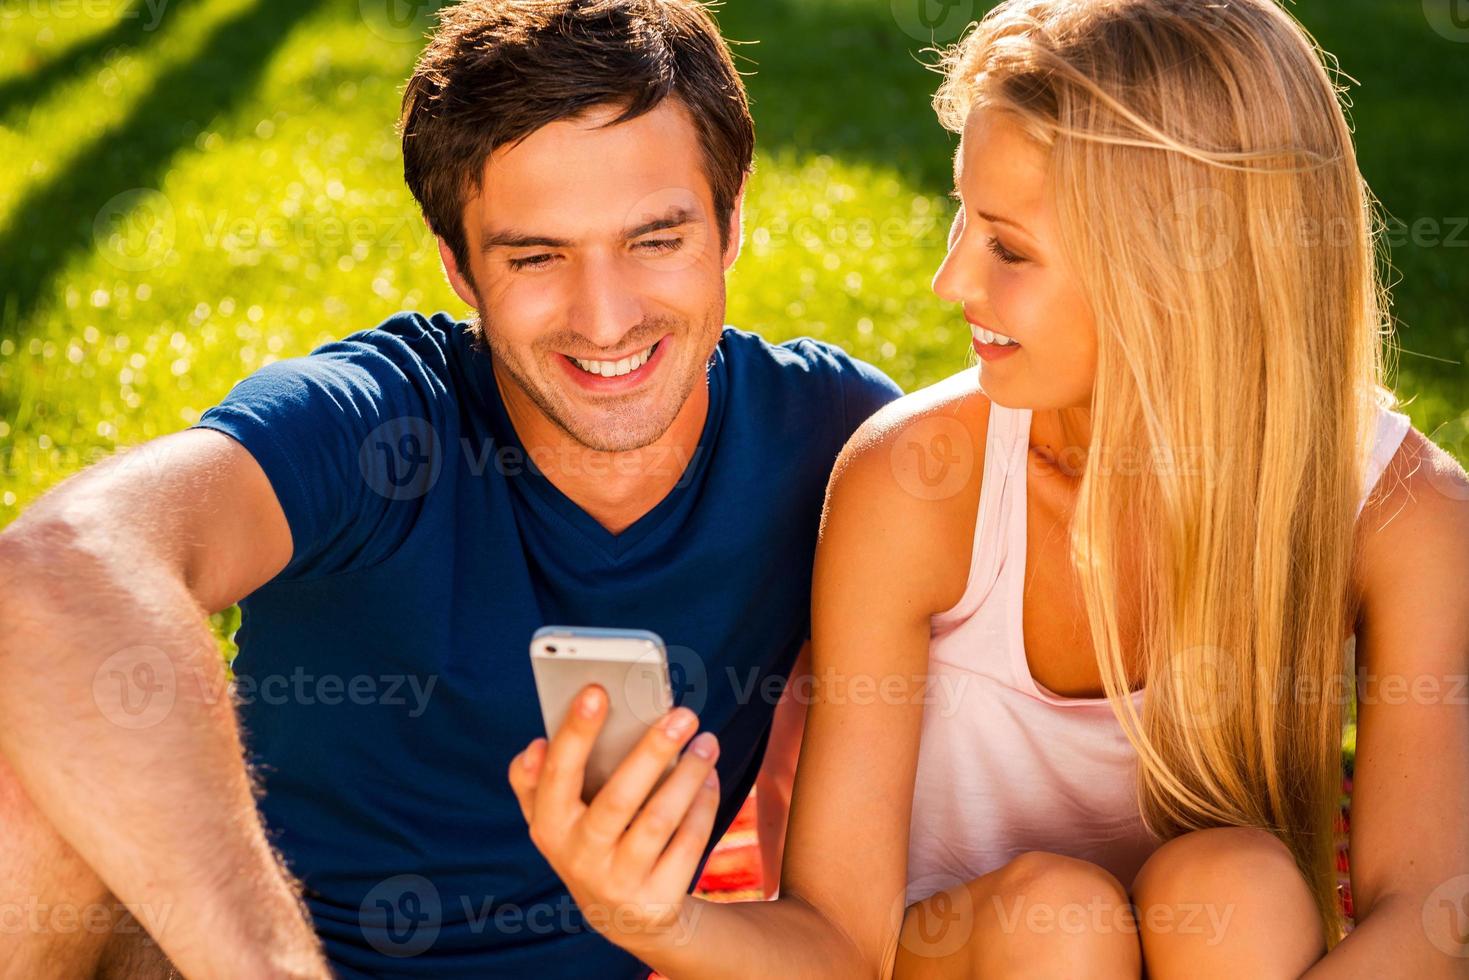 Look at this Happy young loving couple looking at mobile phone and smiling while sitting together on the grass in park photo